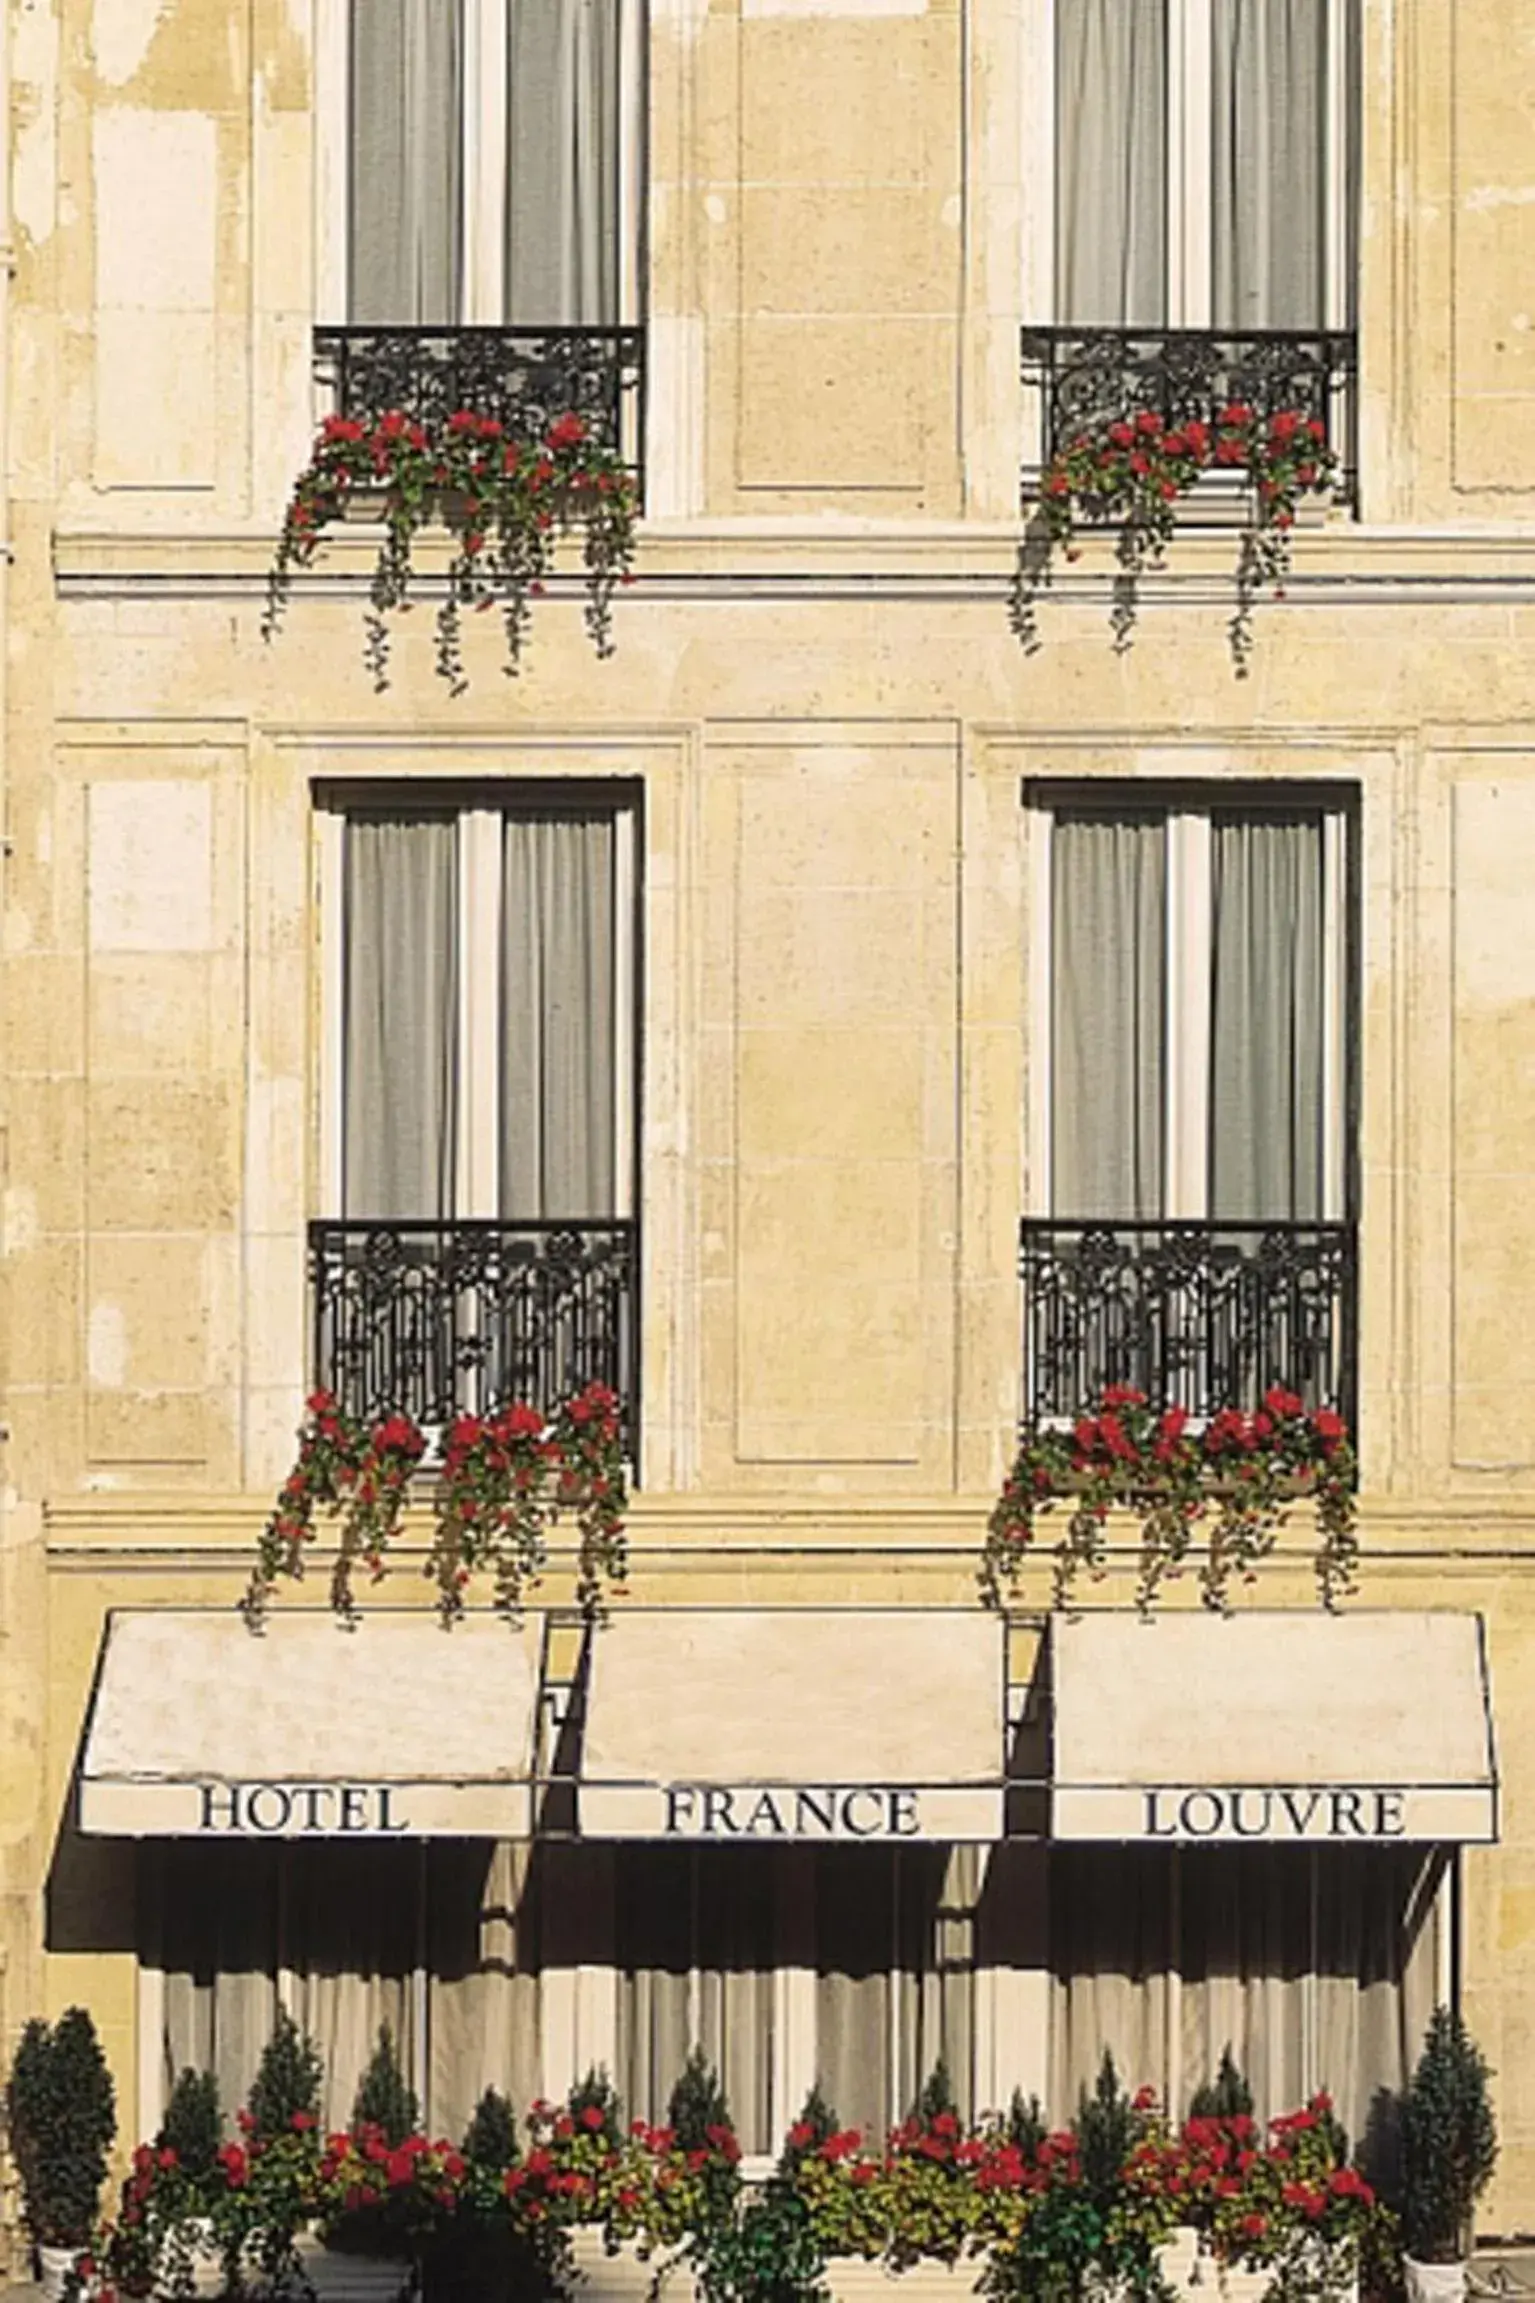 Facade/entrance in Hotel France Louvre